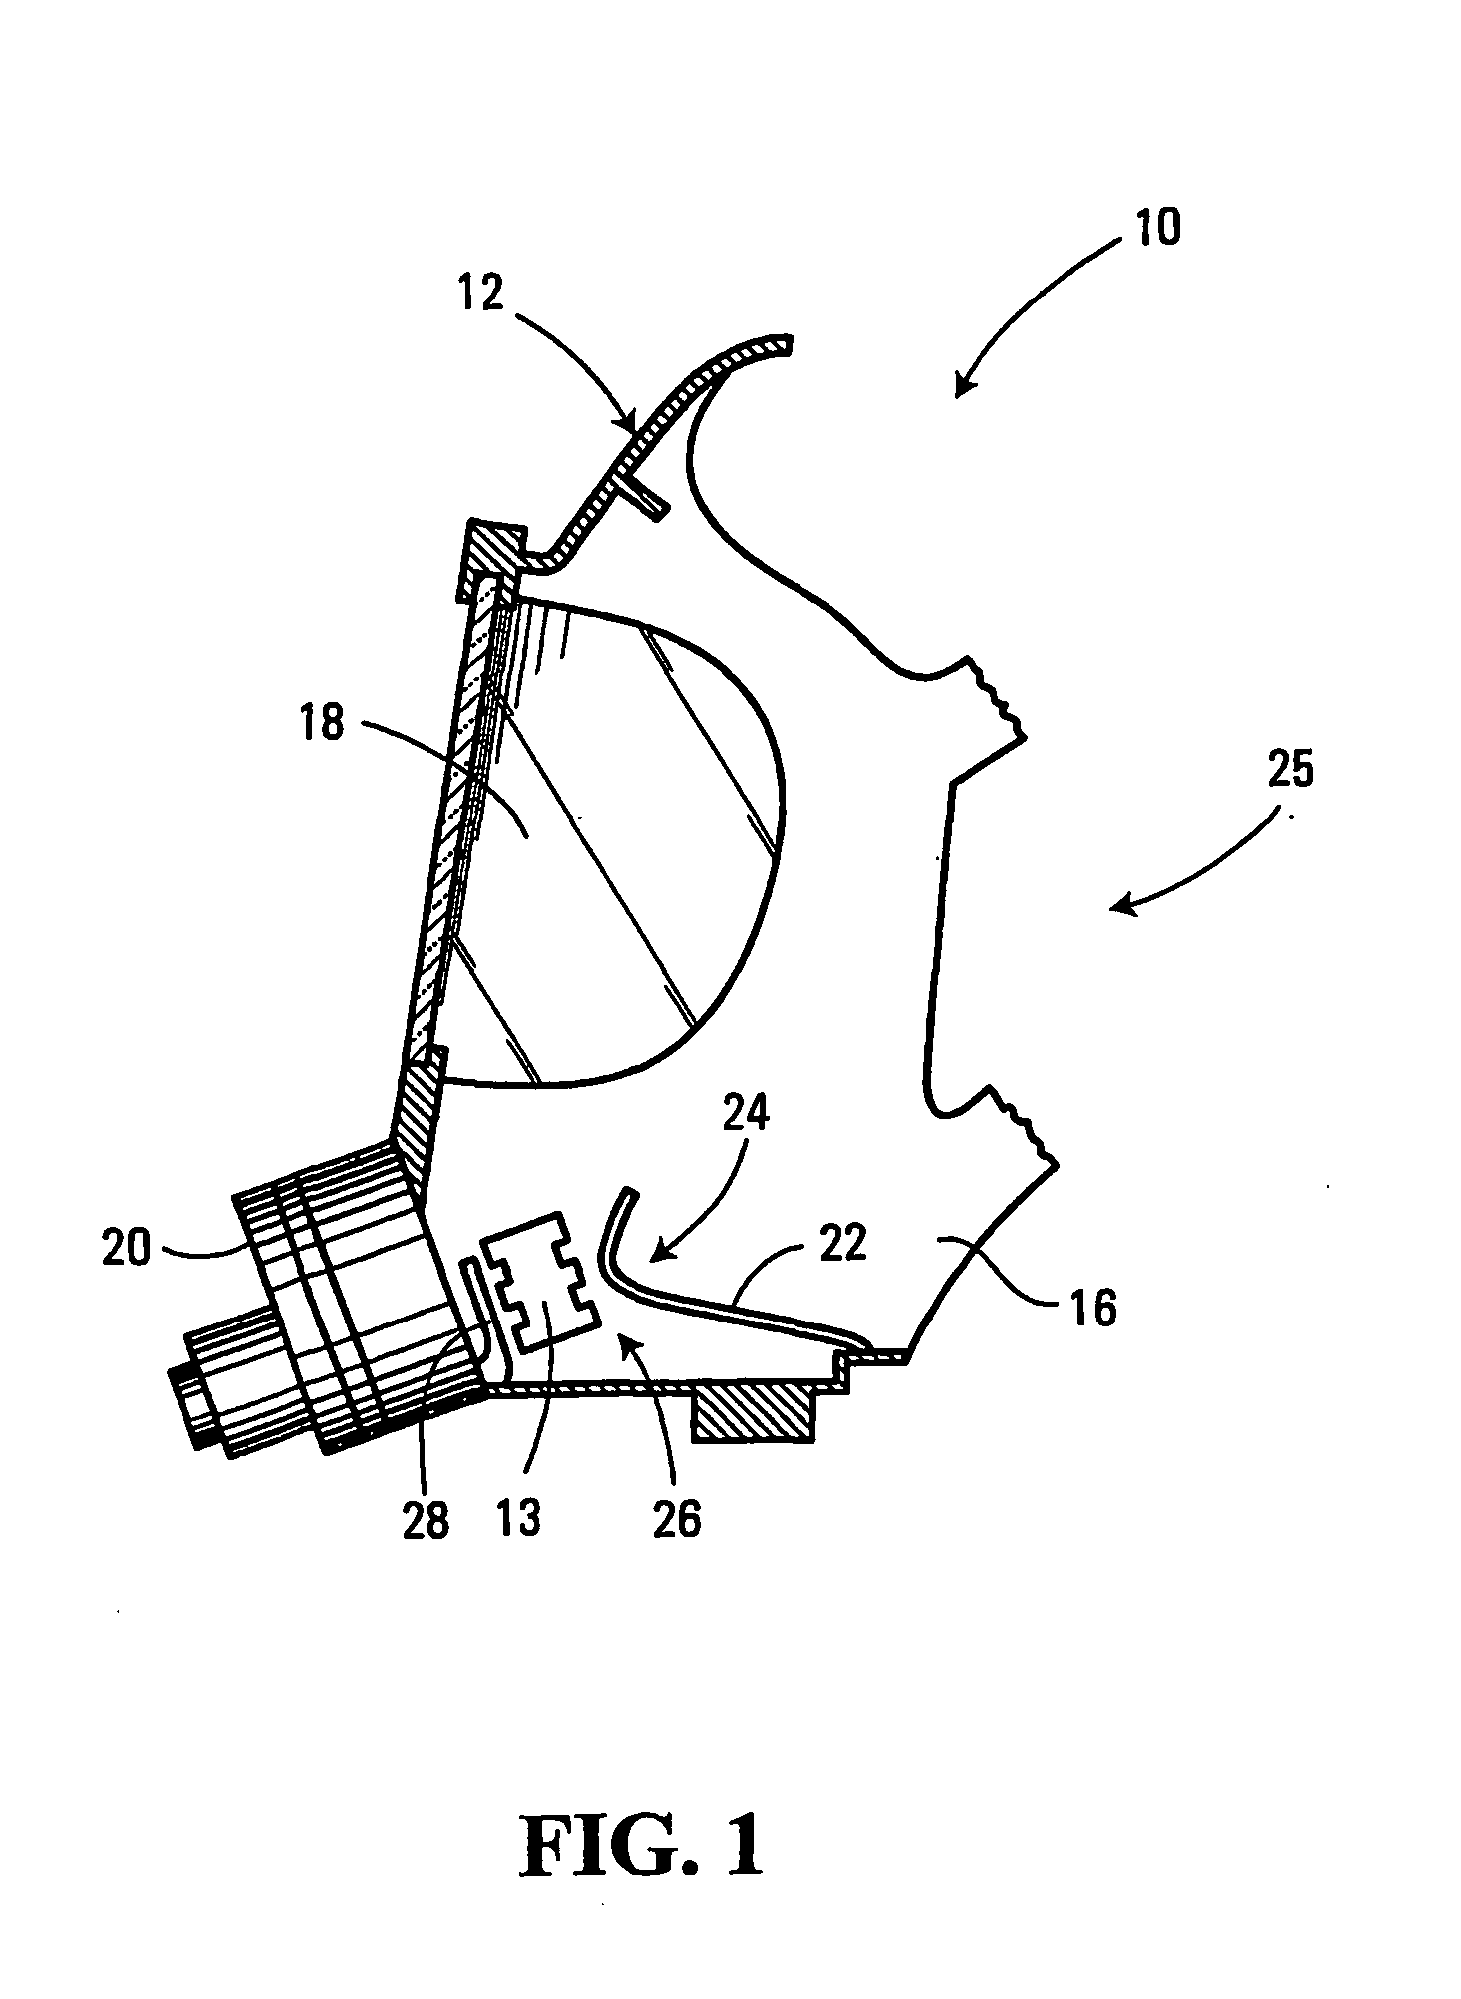 Communication apparatus, method and system for a self-contained breathing apparatus